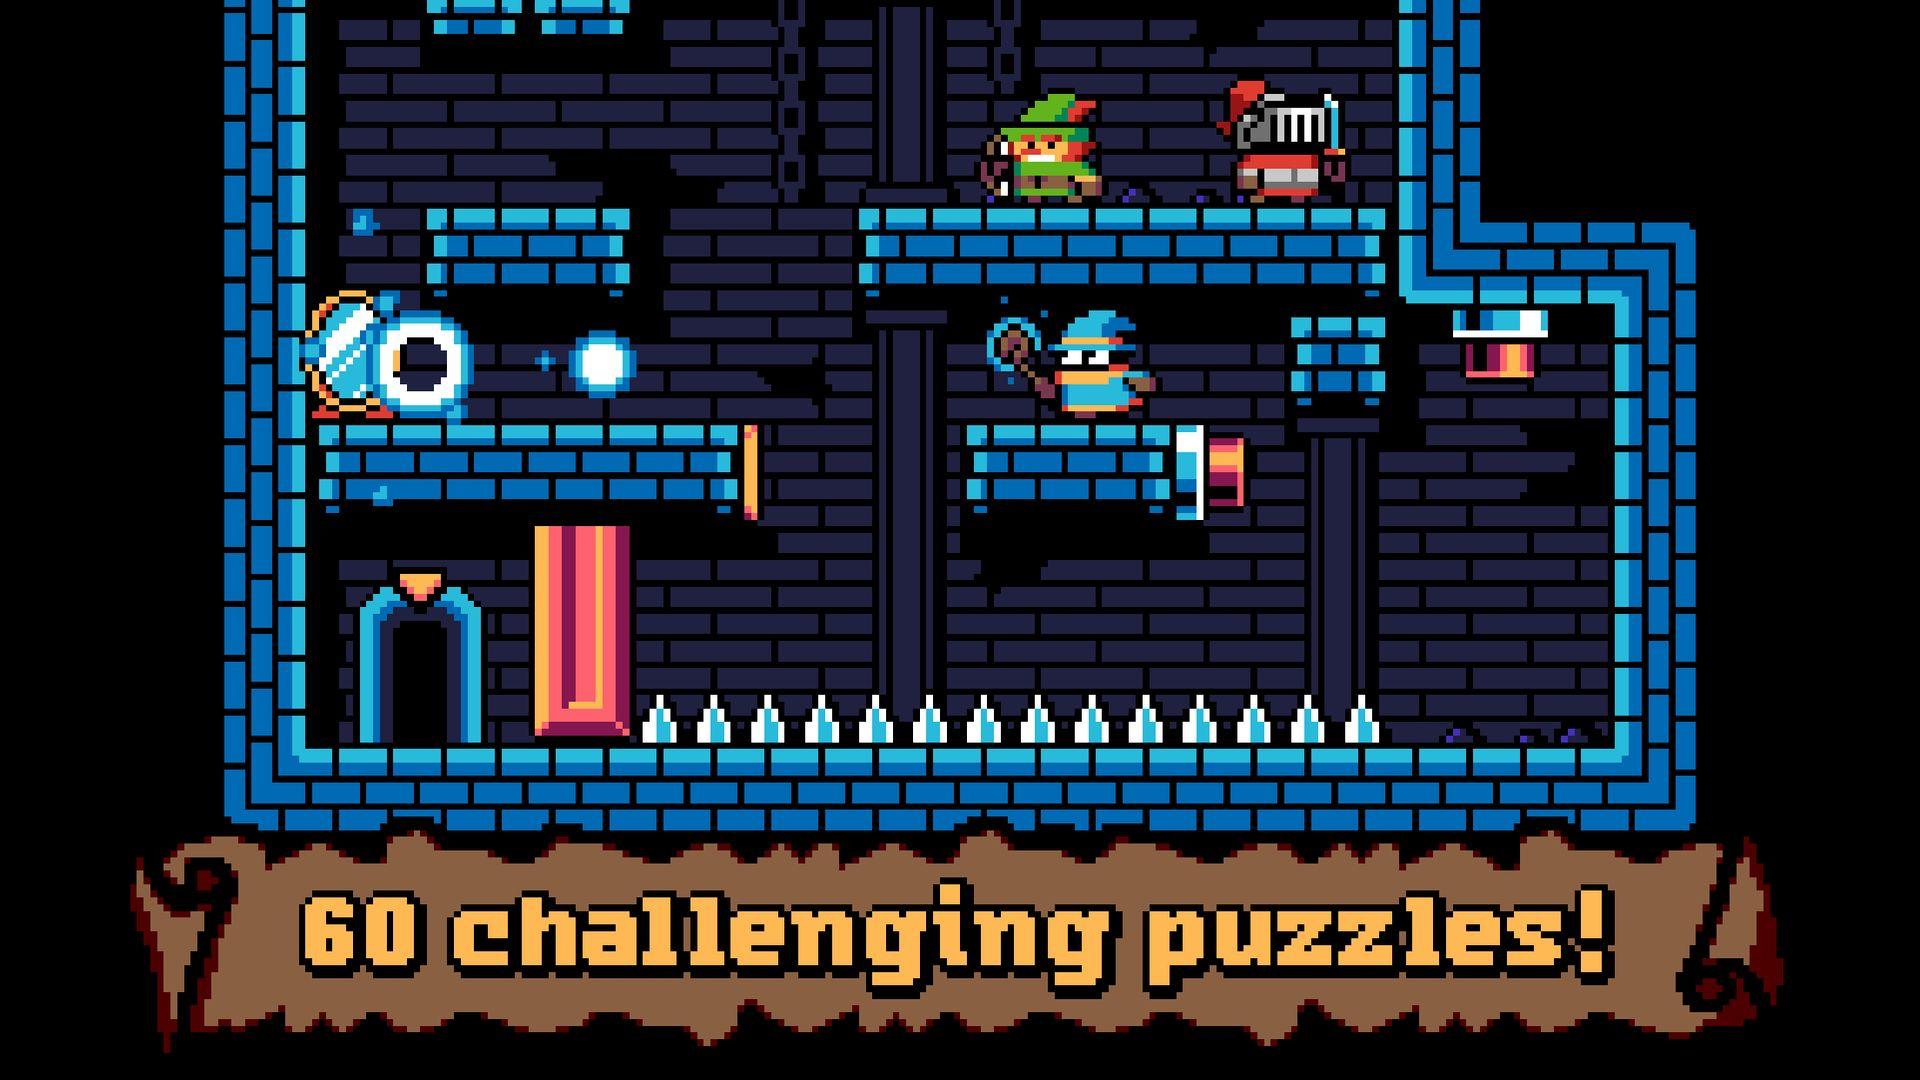 Are You Addicted To Puzzle Rush? 